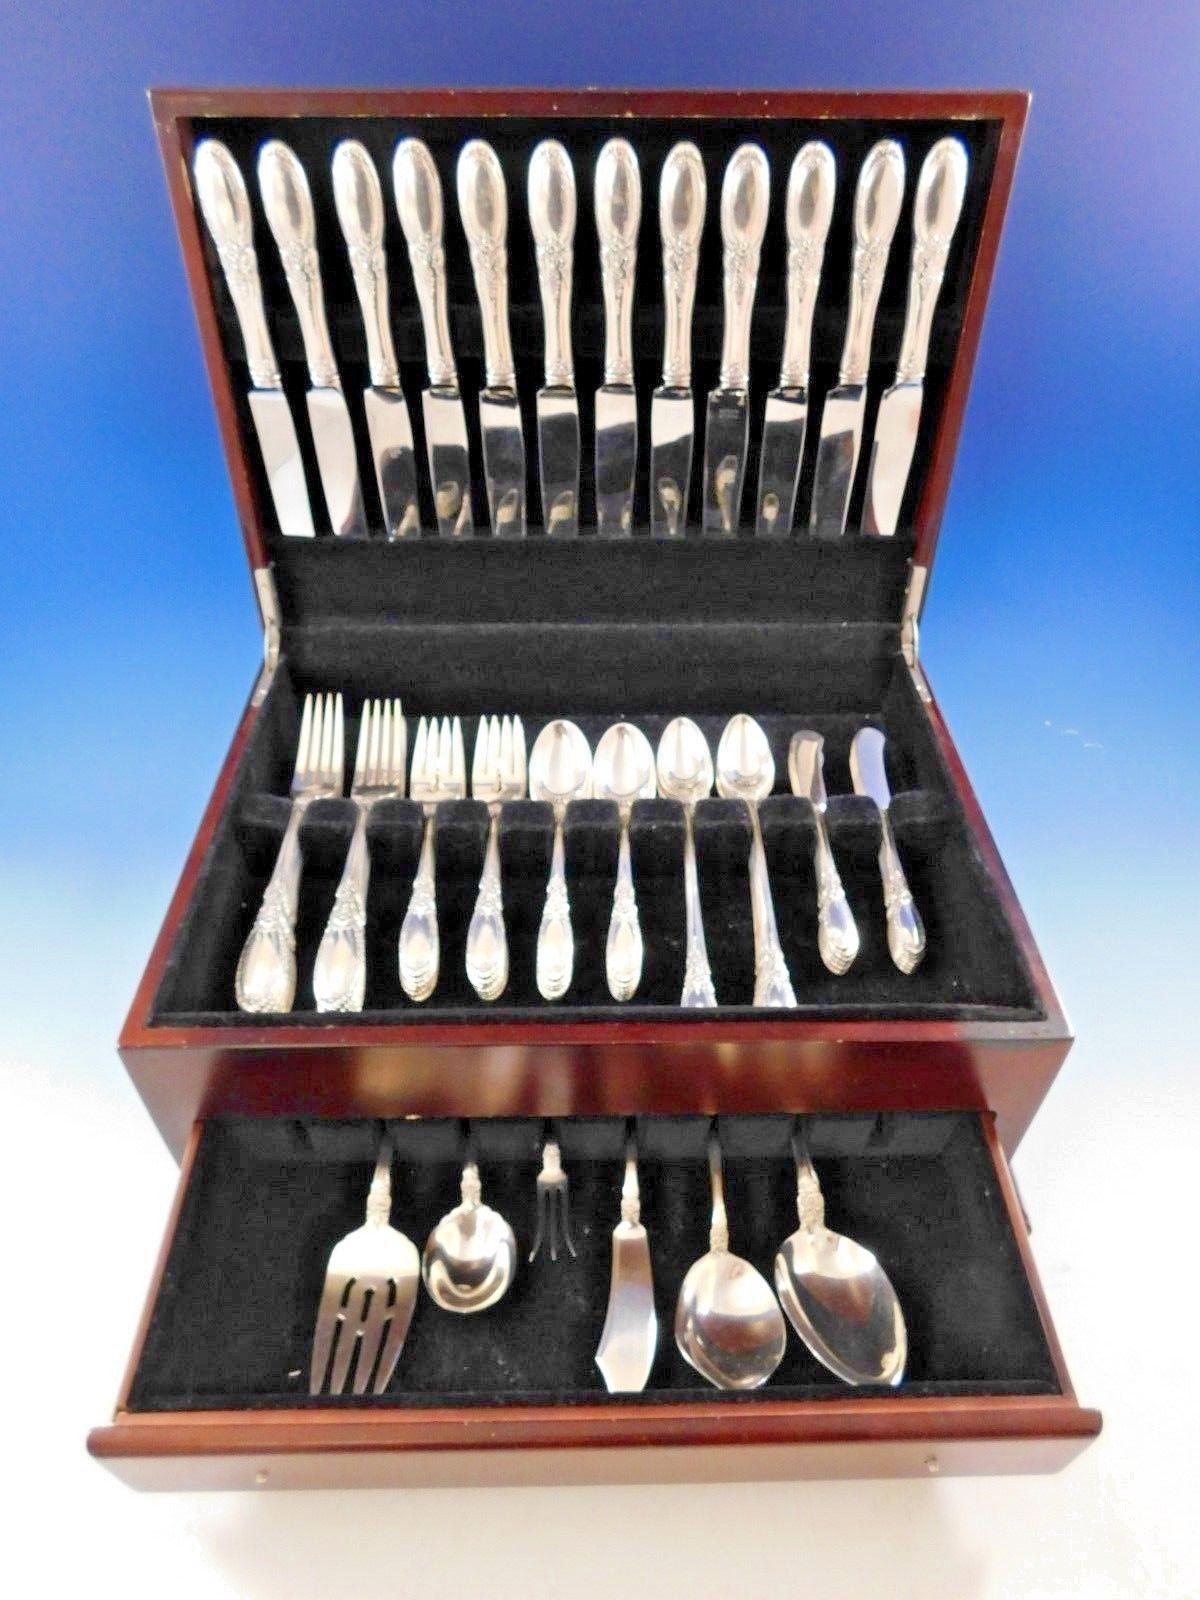 Lovely old mirror by Towle sterling silver flatware set of 78 pieces. This set includes:

12 dinner knives, 9 3/4